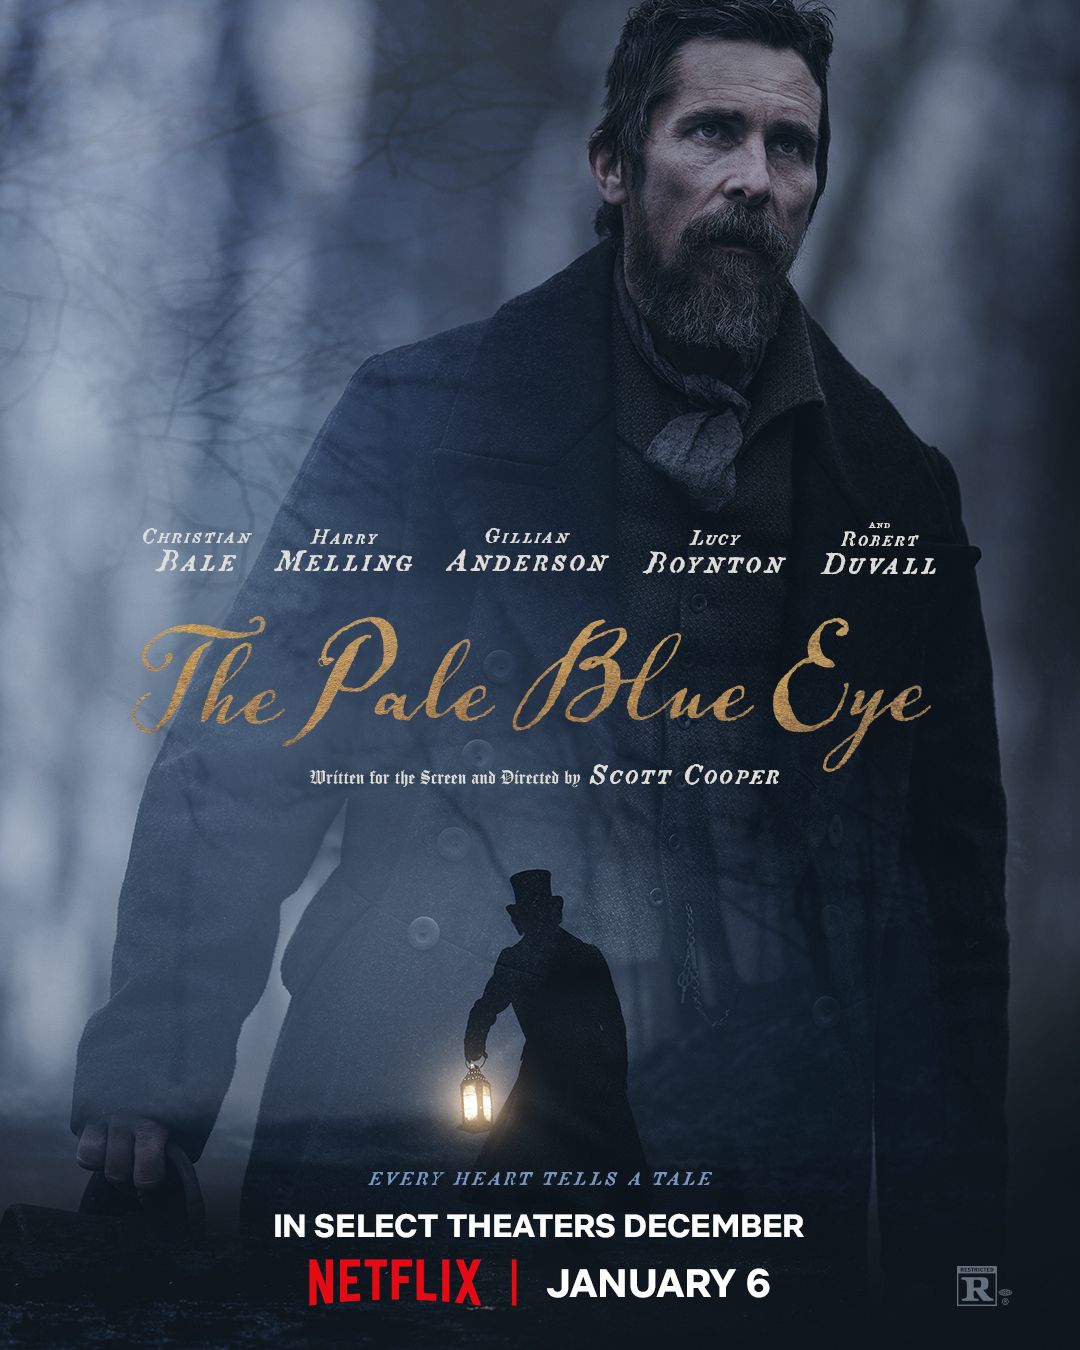 The Pale Blue Eye Film Poster